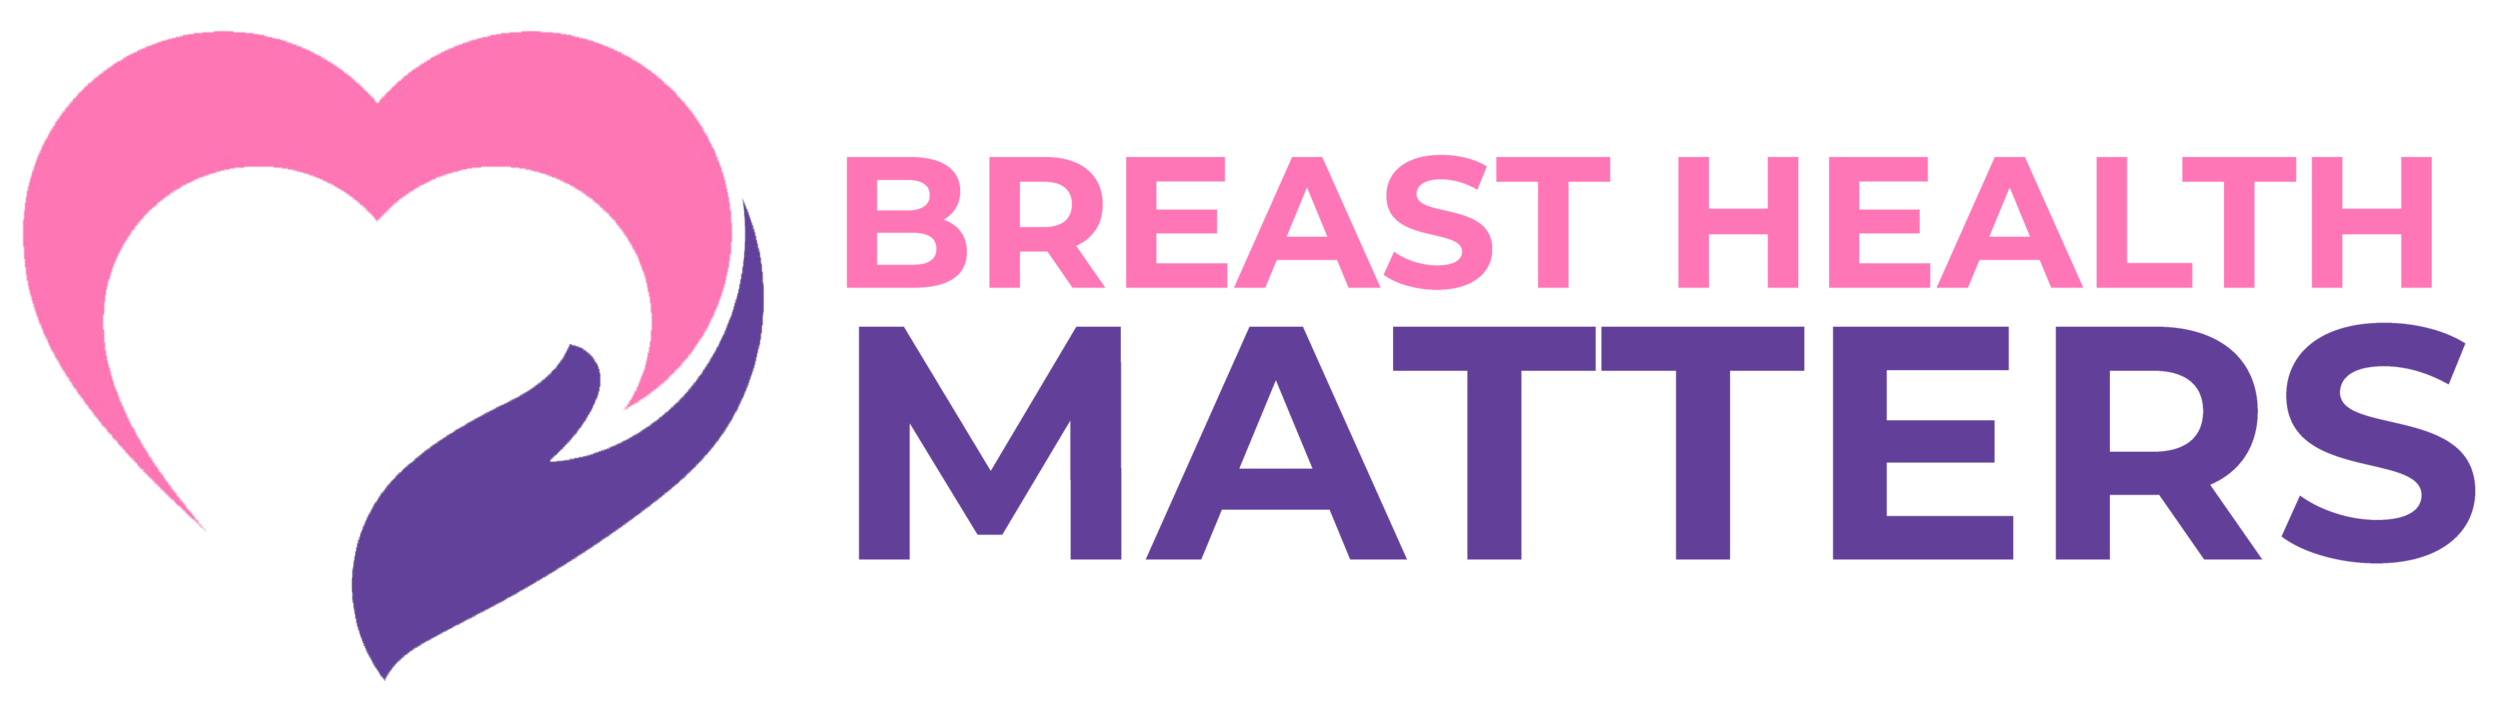 Your Breast Health Matters!❣️ Understanding your breast shape